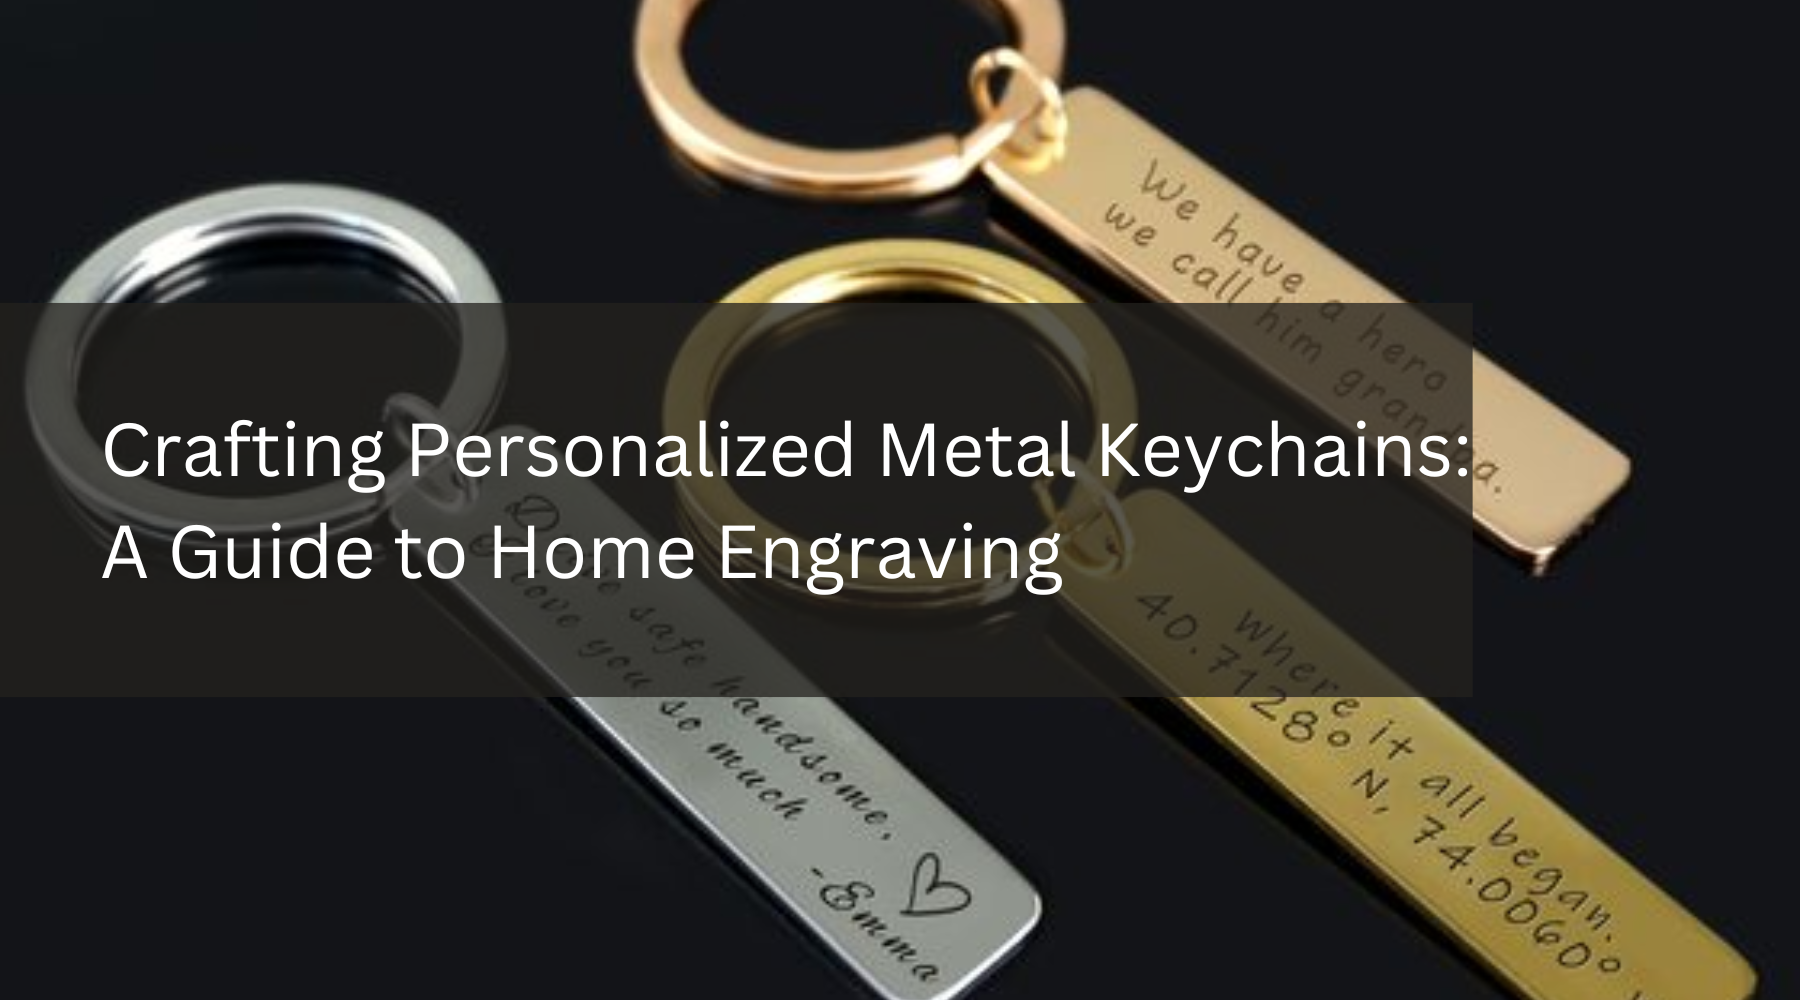 Crafting Personalized Metal Keychains: A Guide to Home Engraving